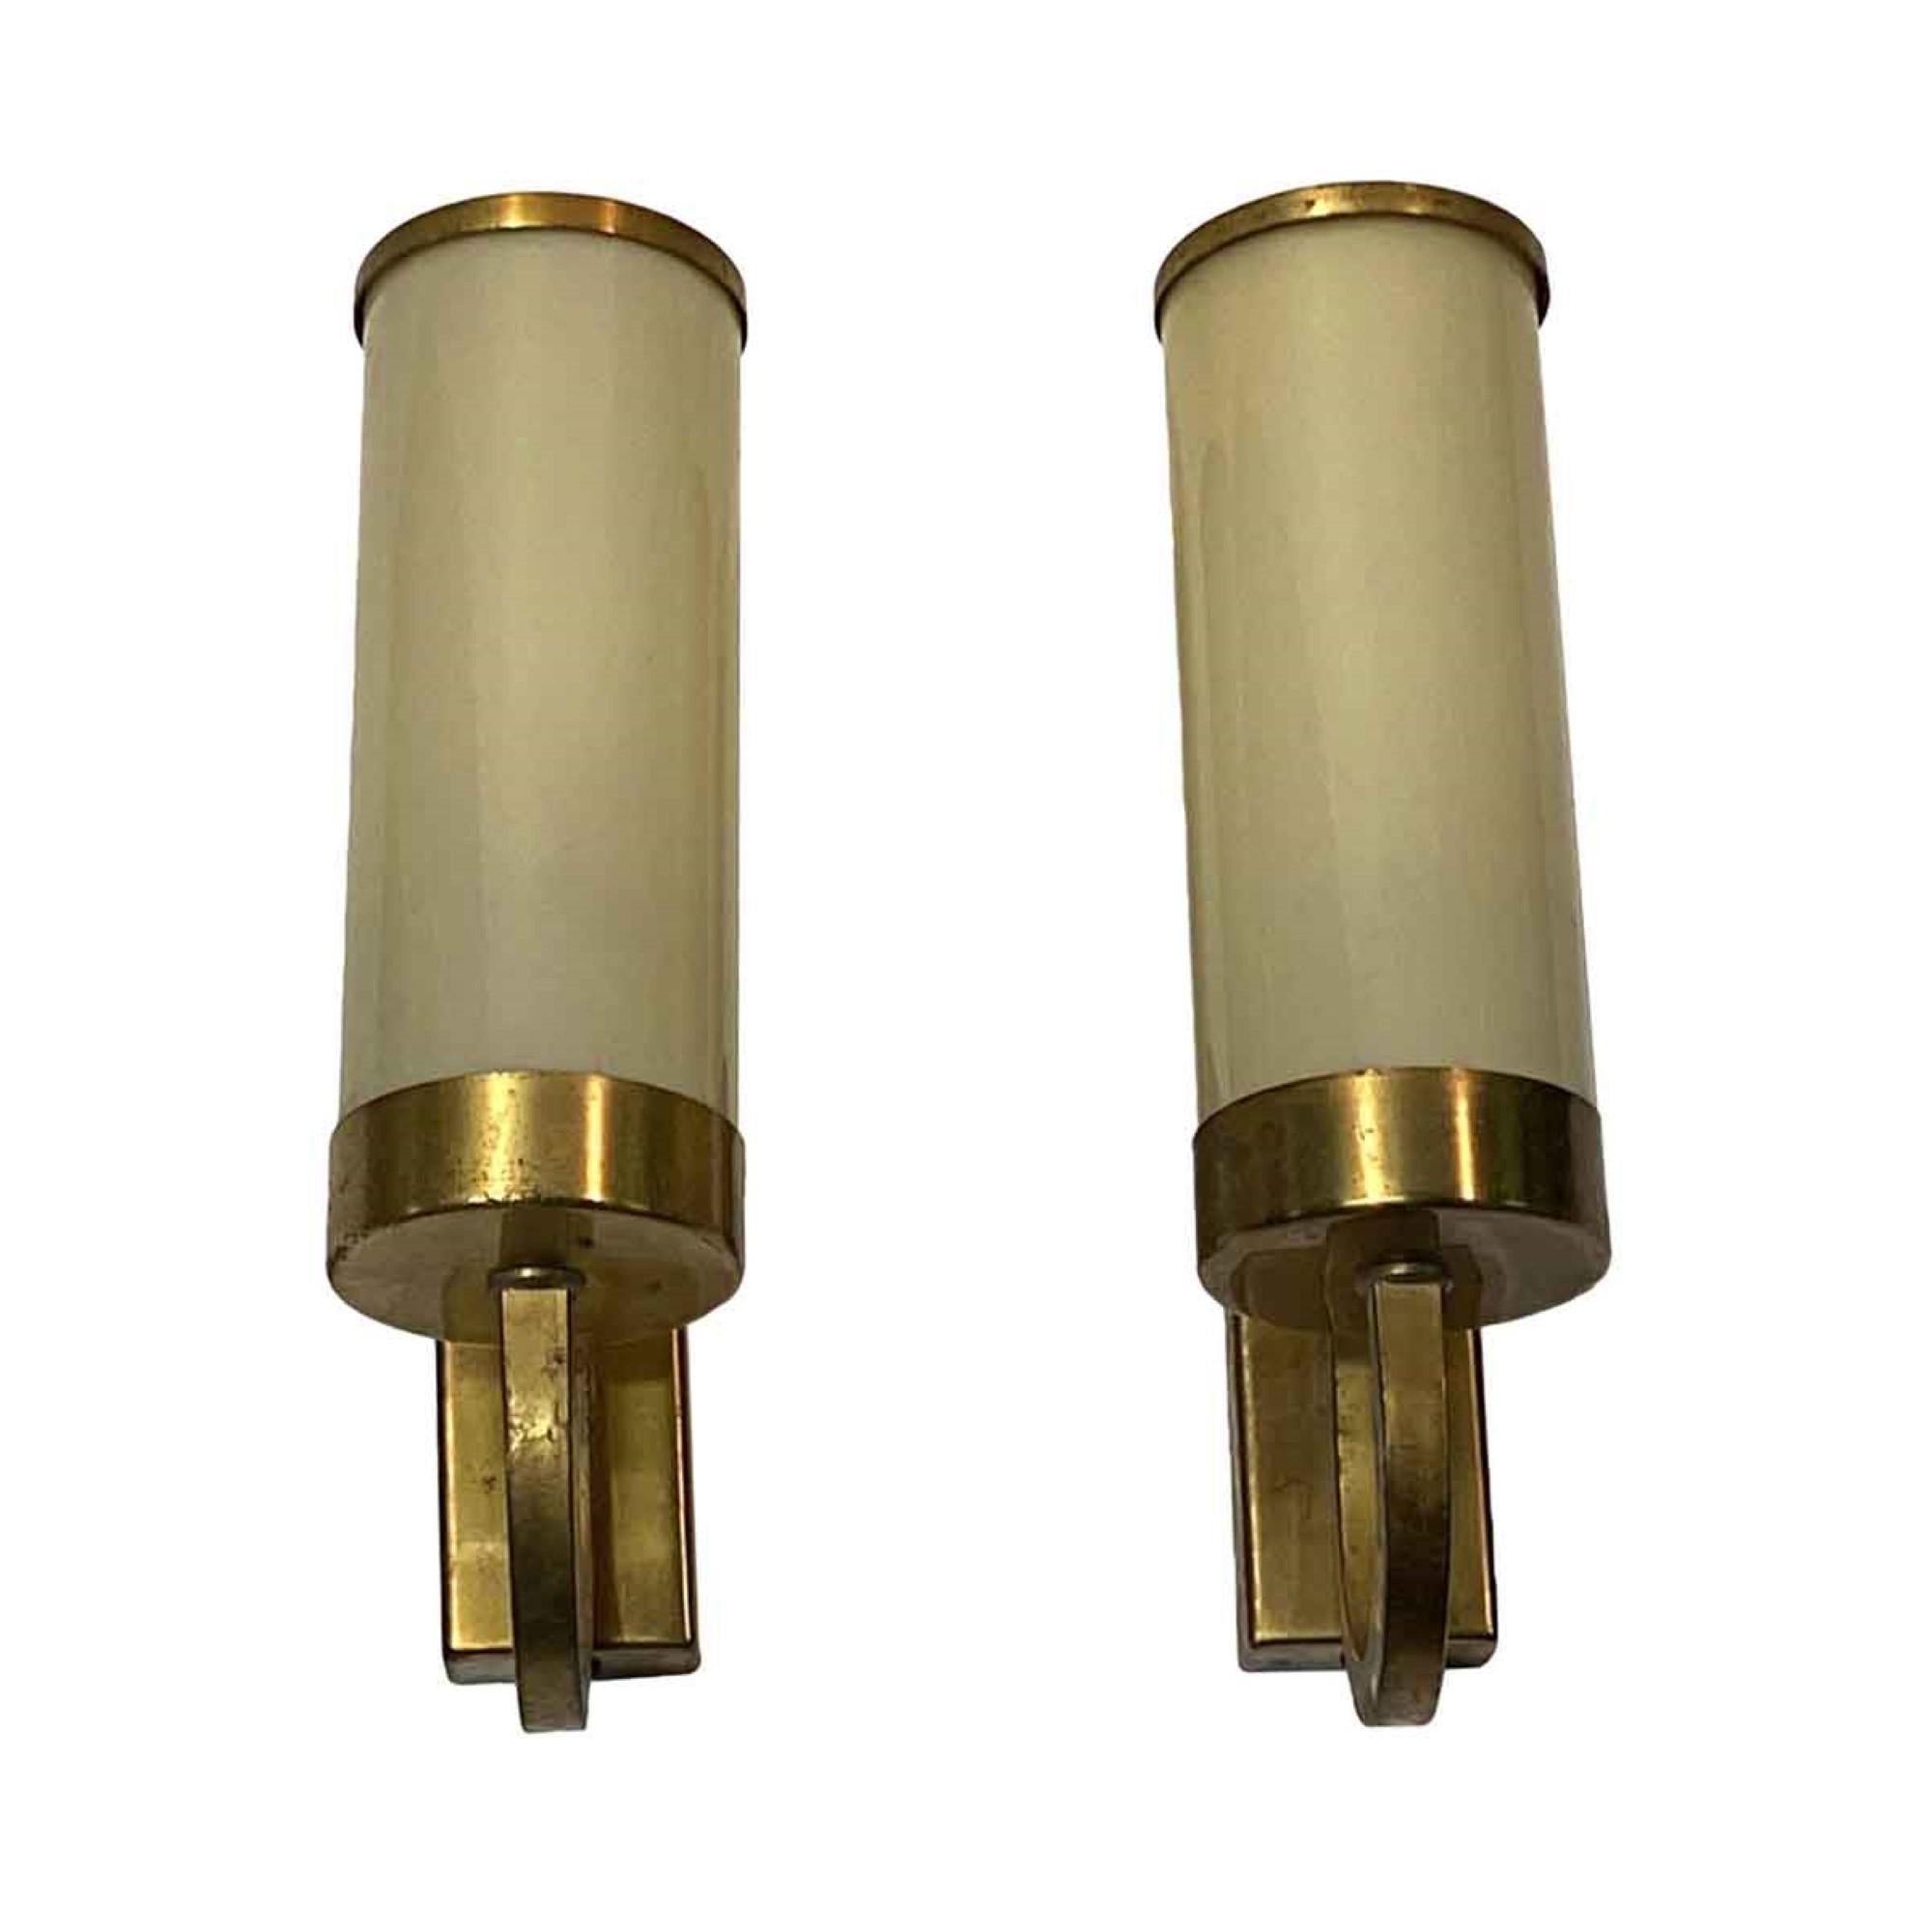 Brushed brass over steel original cylinder shaped sconces with tan glass from 1920s. Priced as a pair. Price includes restoration.